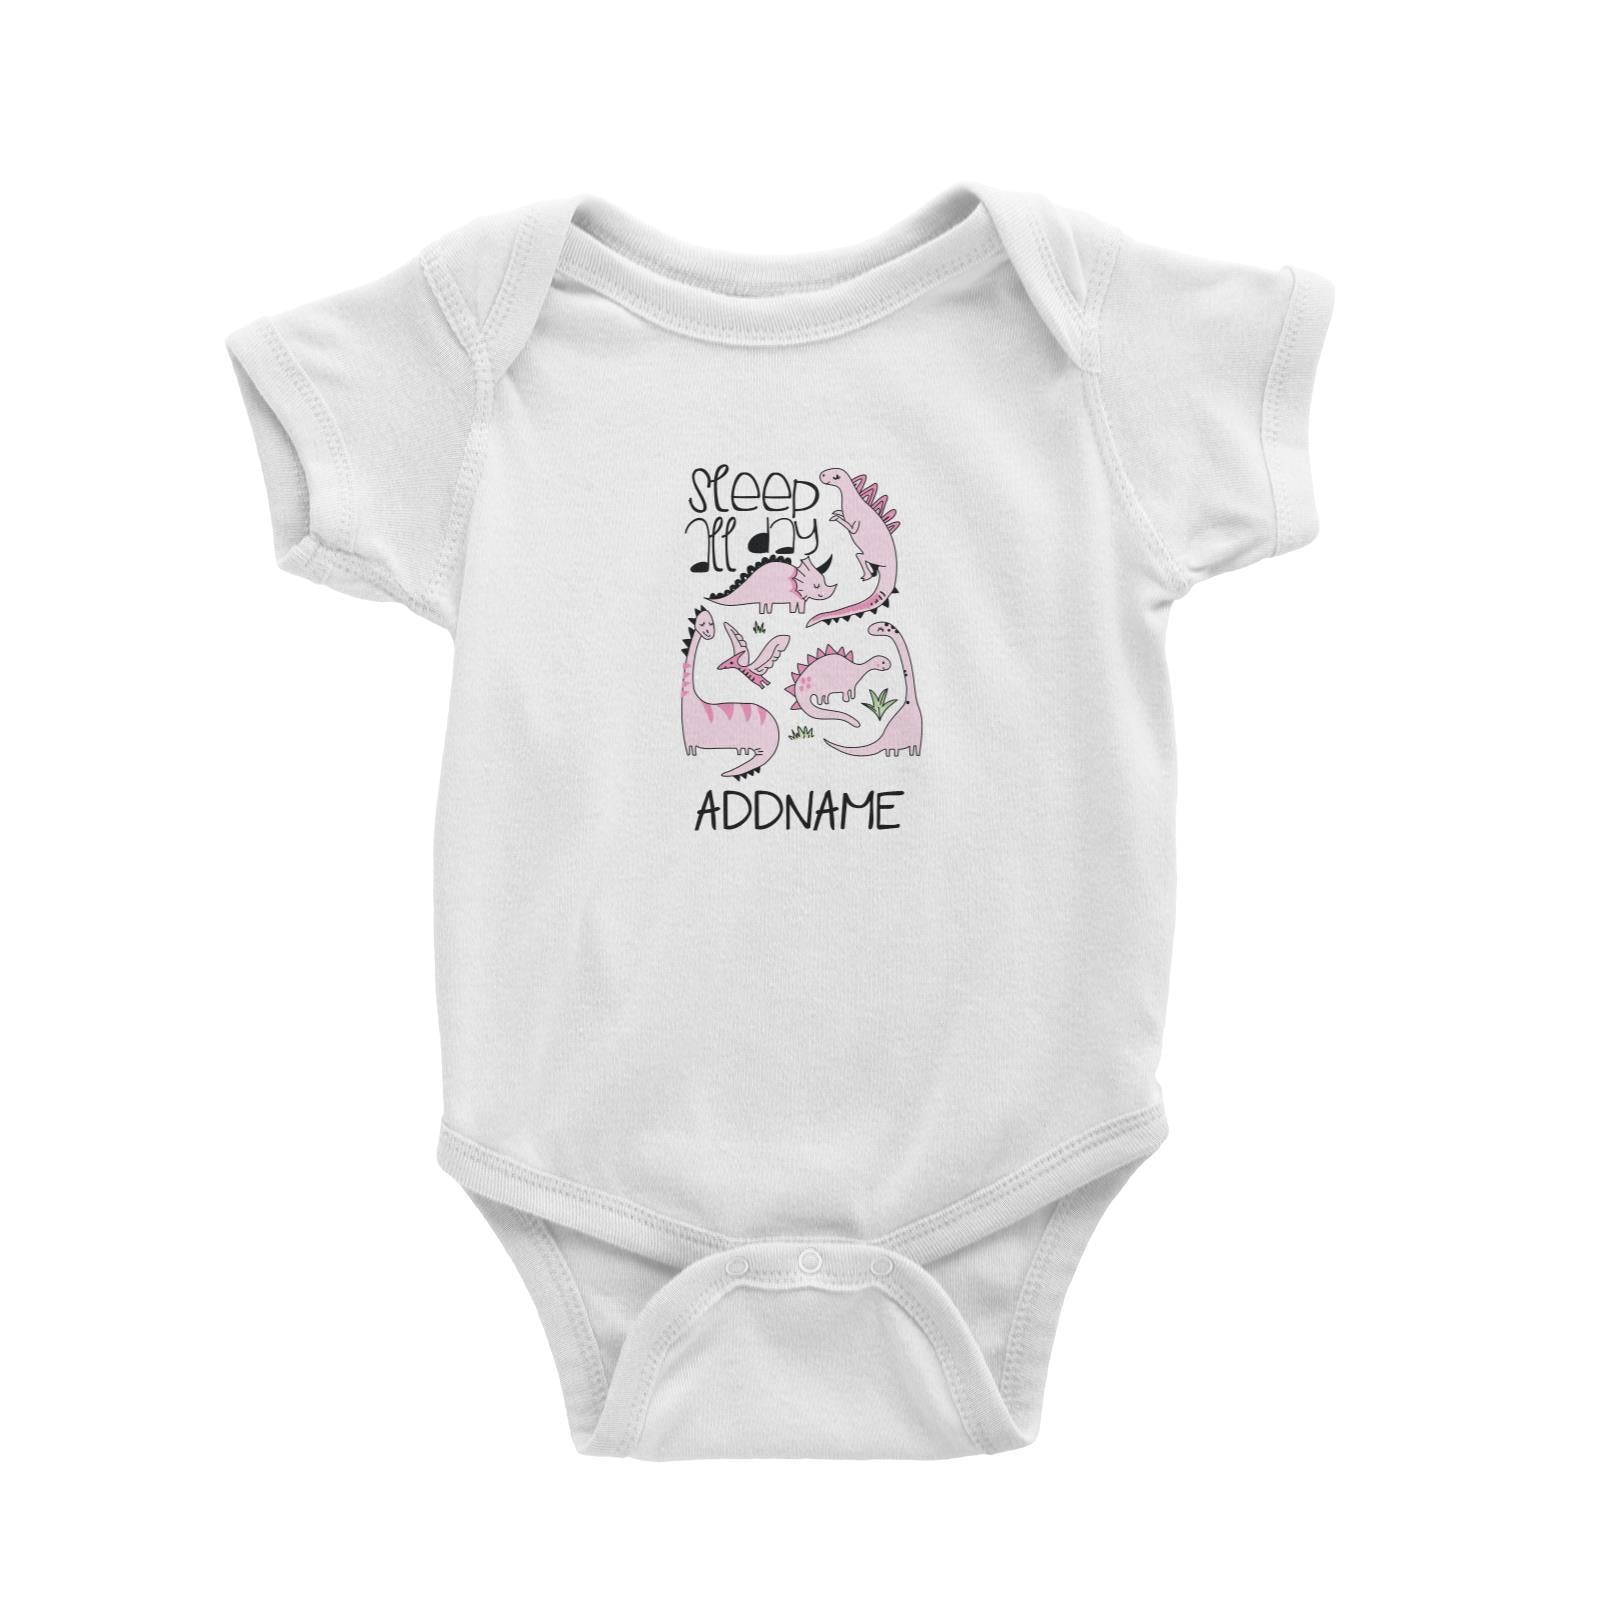 Cool Vibrant Series Sleep All Day Dinosaur Addname Baby Romper